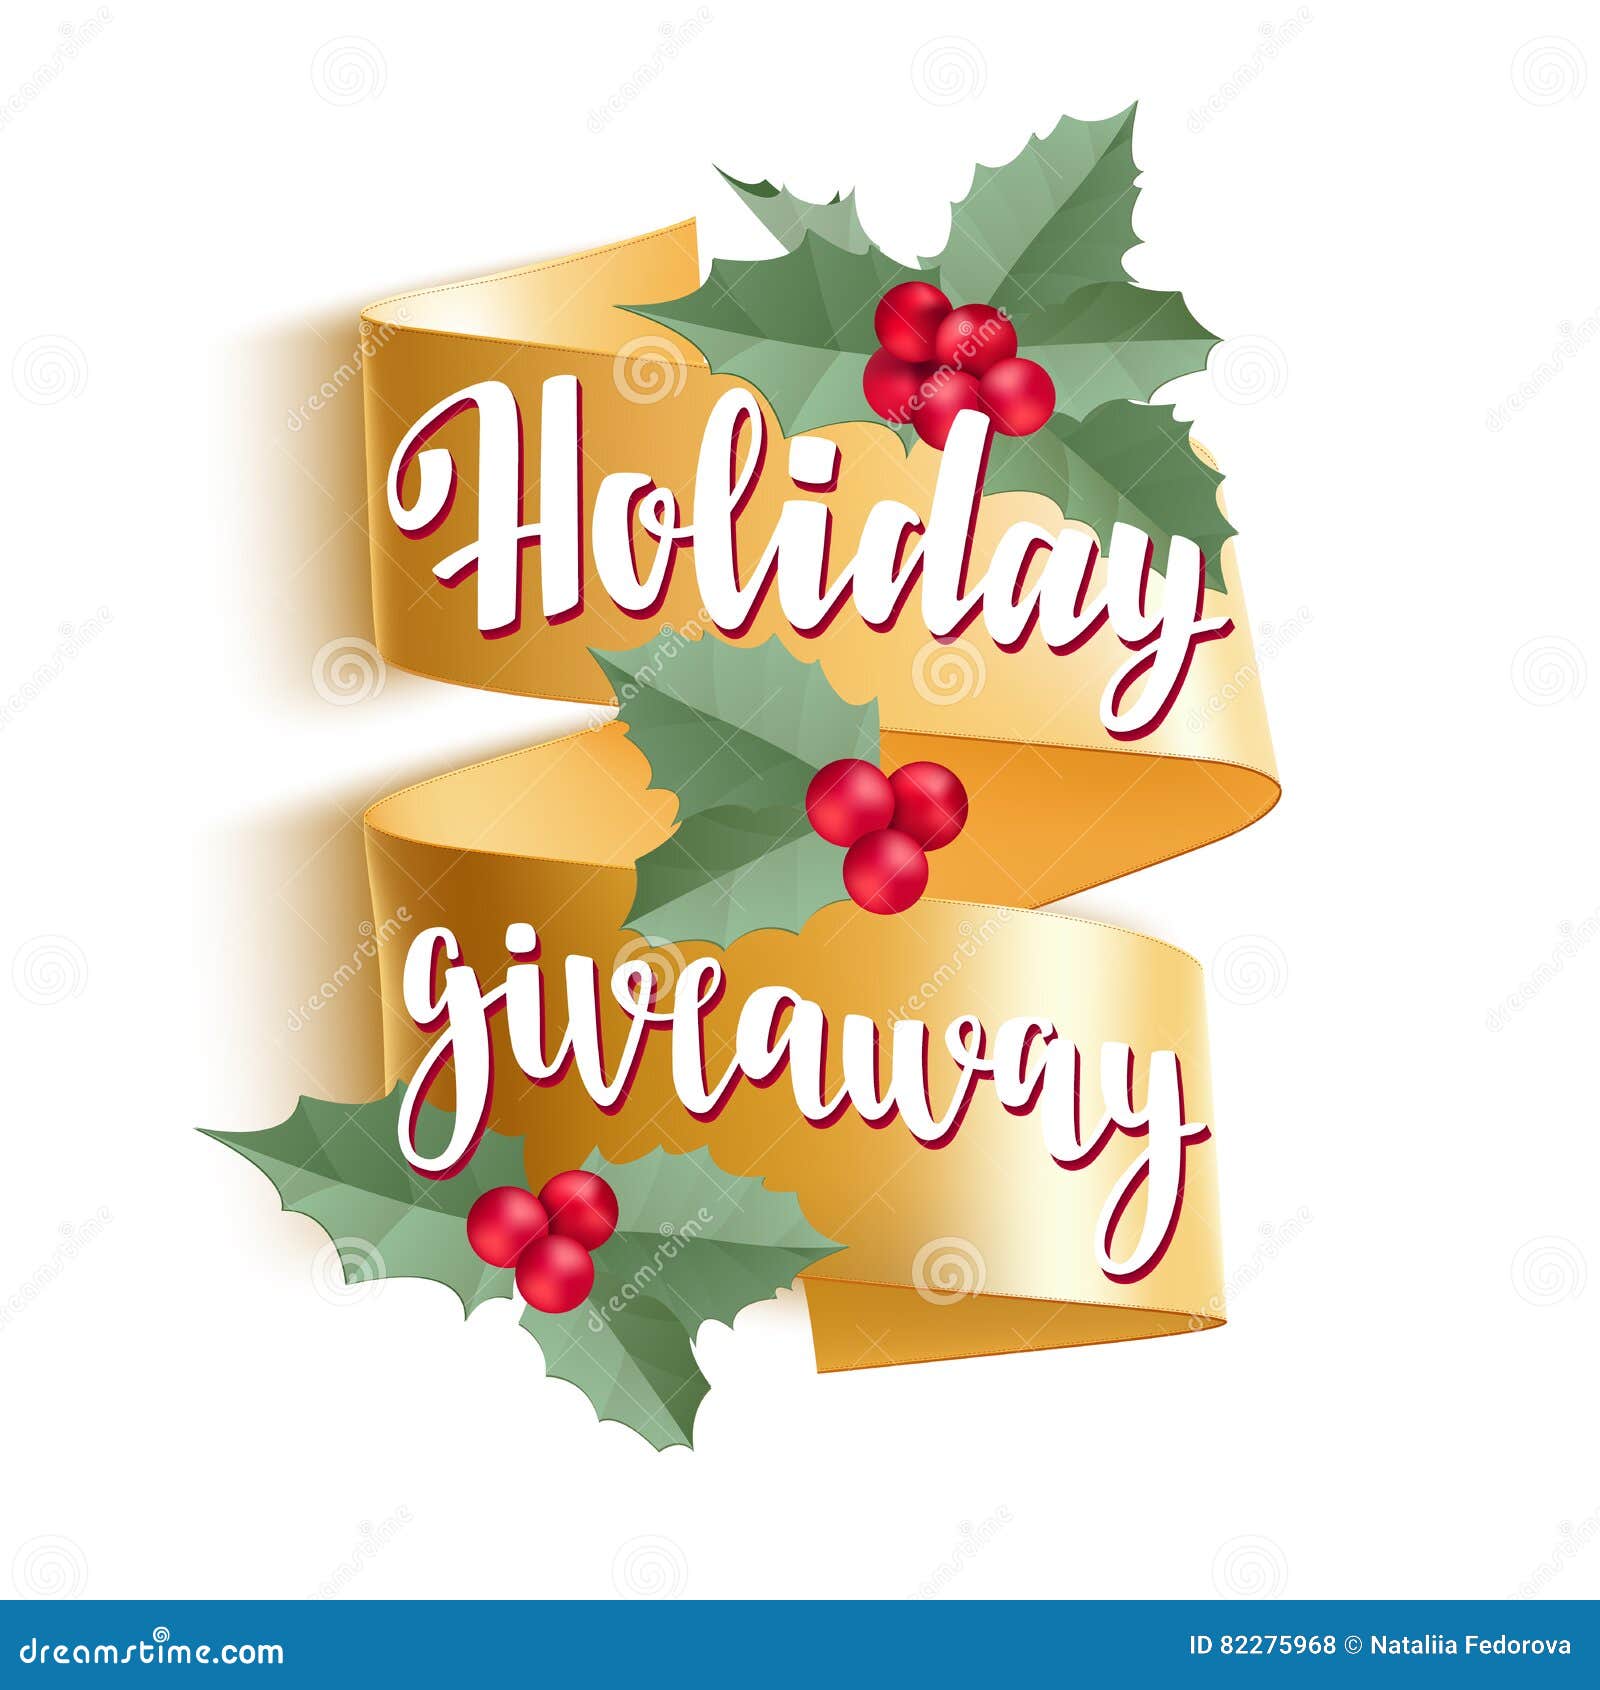 Holly Day Christmas Giveaway